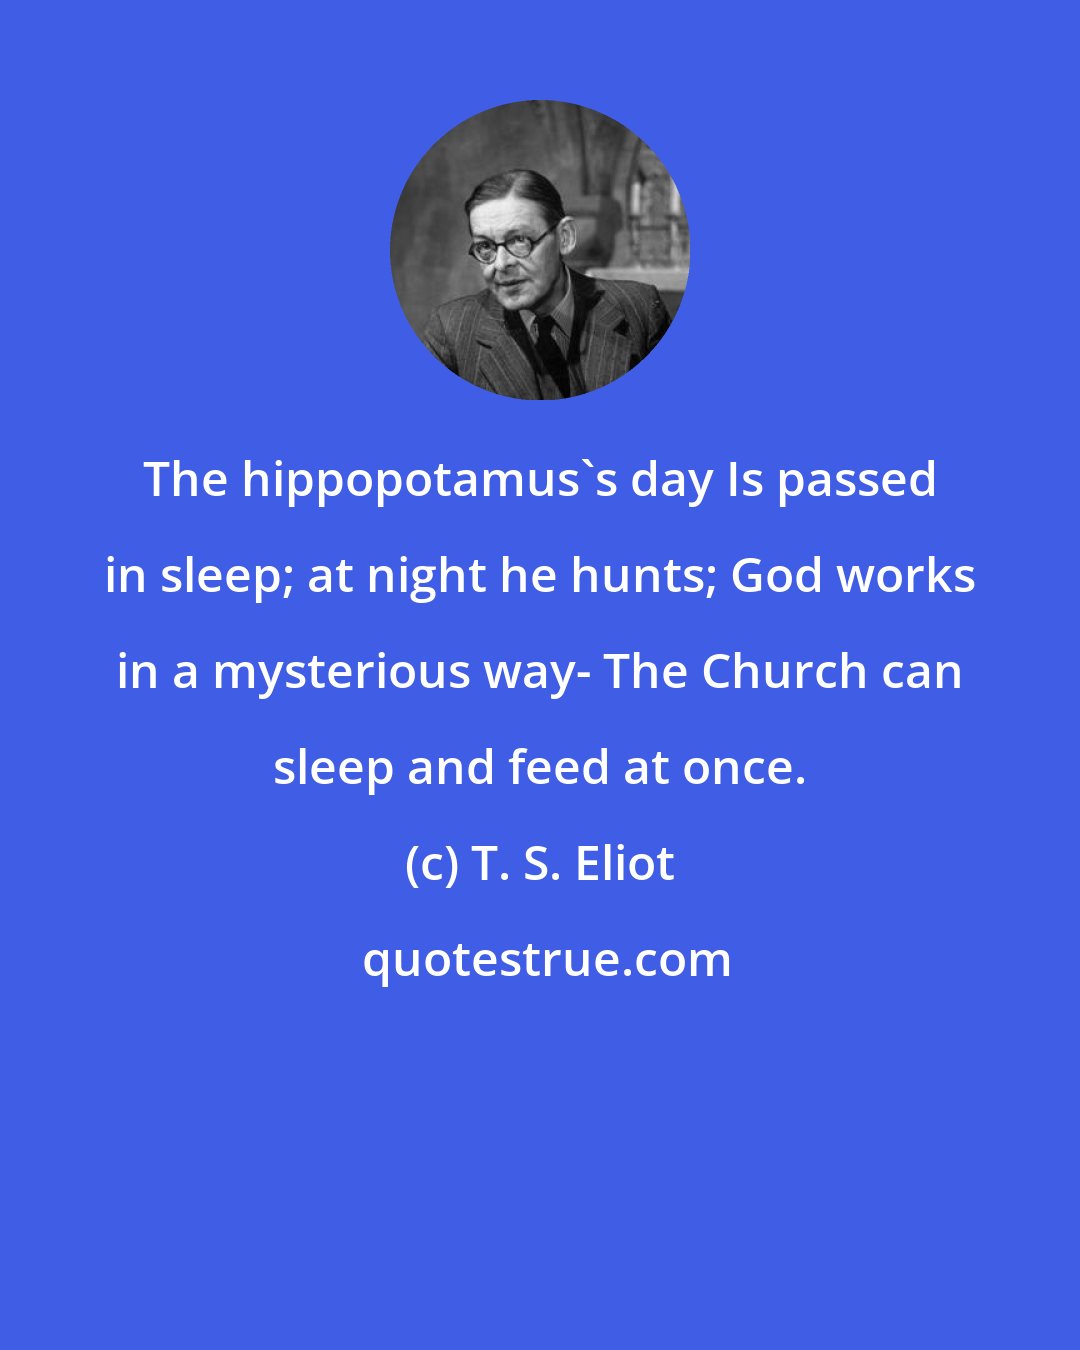 T. S. Eliot: The hippopotamus's day Is passed in sleep; at night he hunts; God works in a mysterious way- The Church can sleep and feed at once.